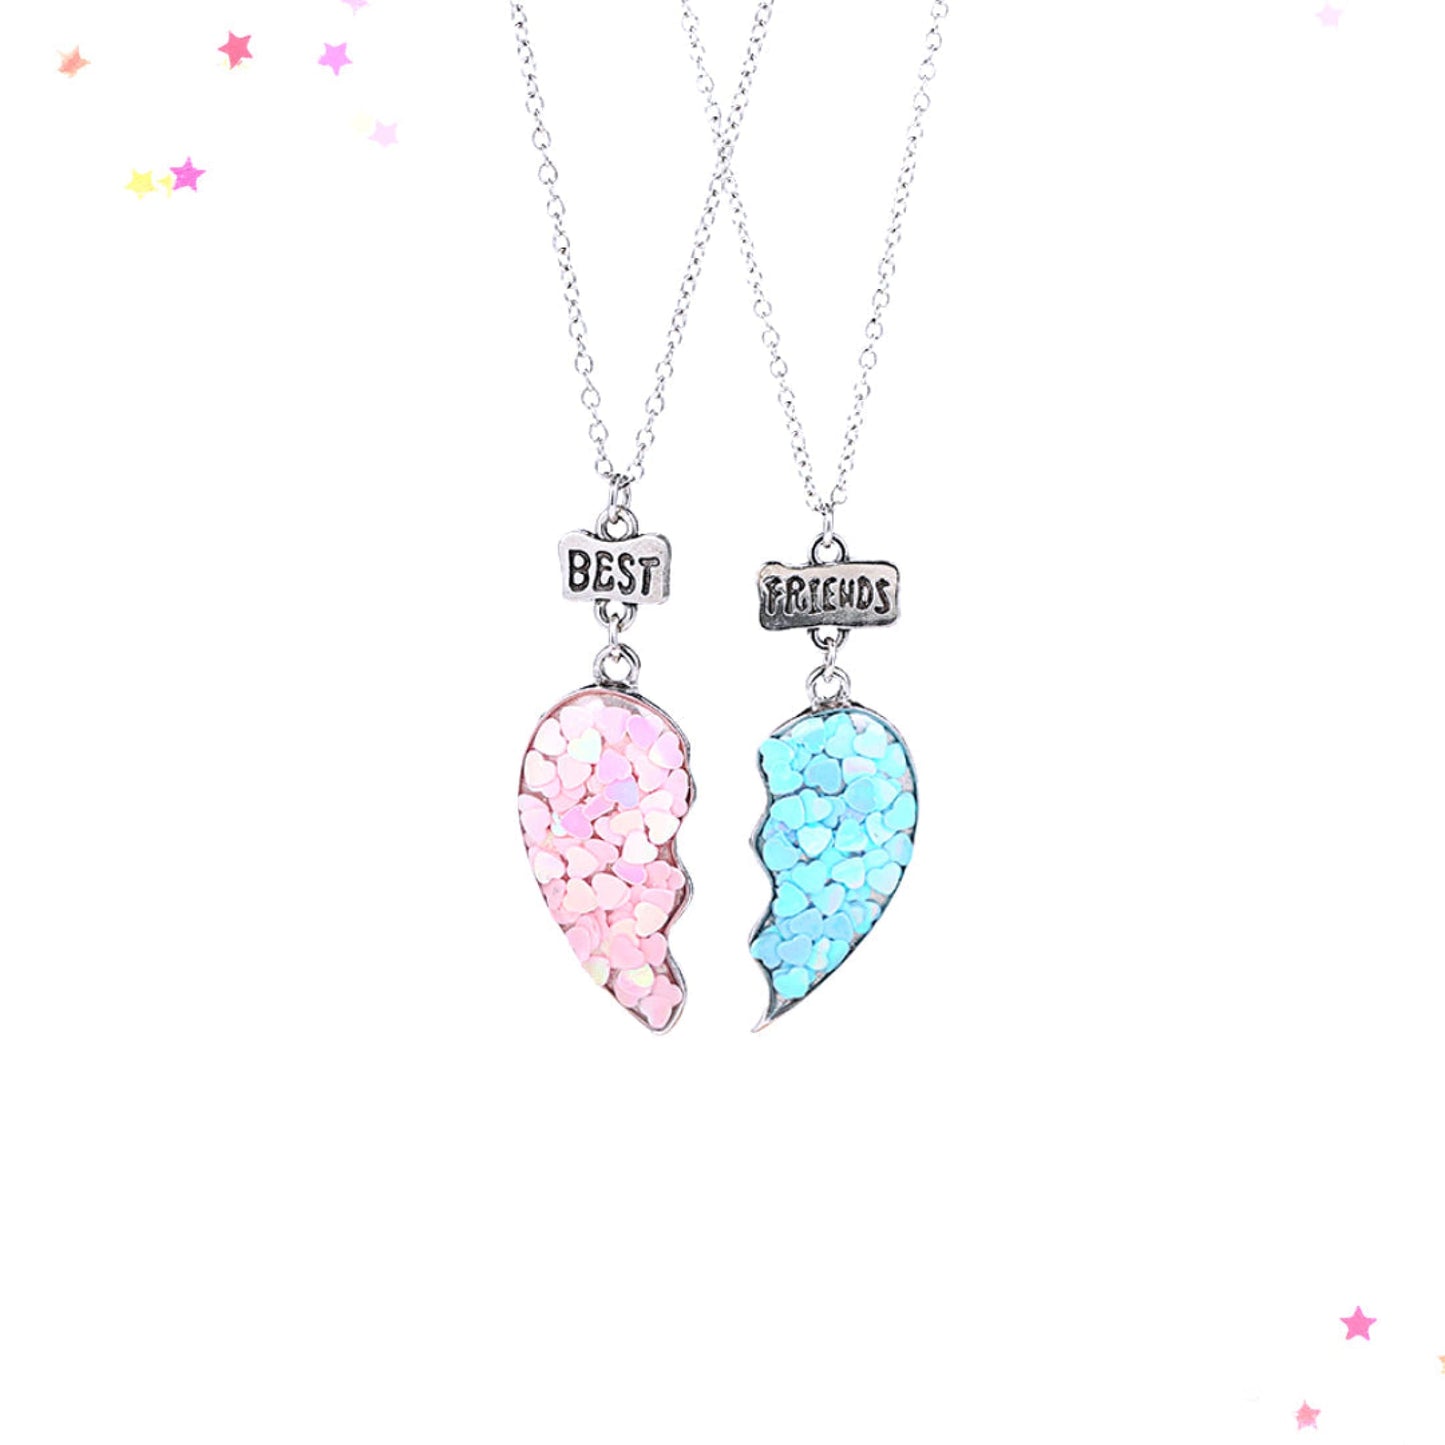 Best Friends Sequin Heart Necklace Set from Confetti Kitty, Only 12.99